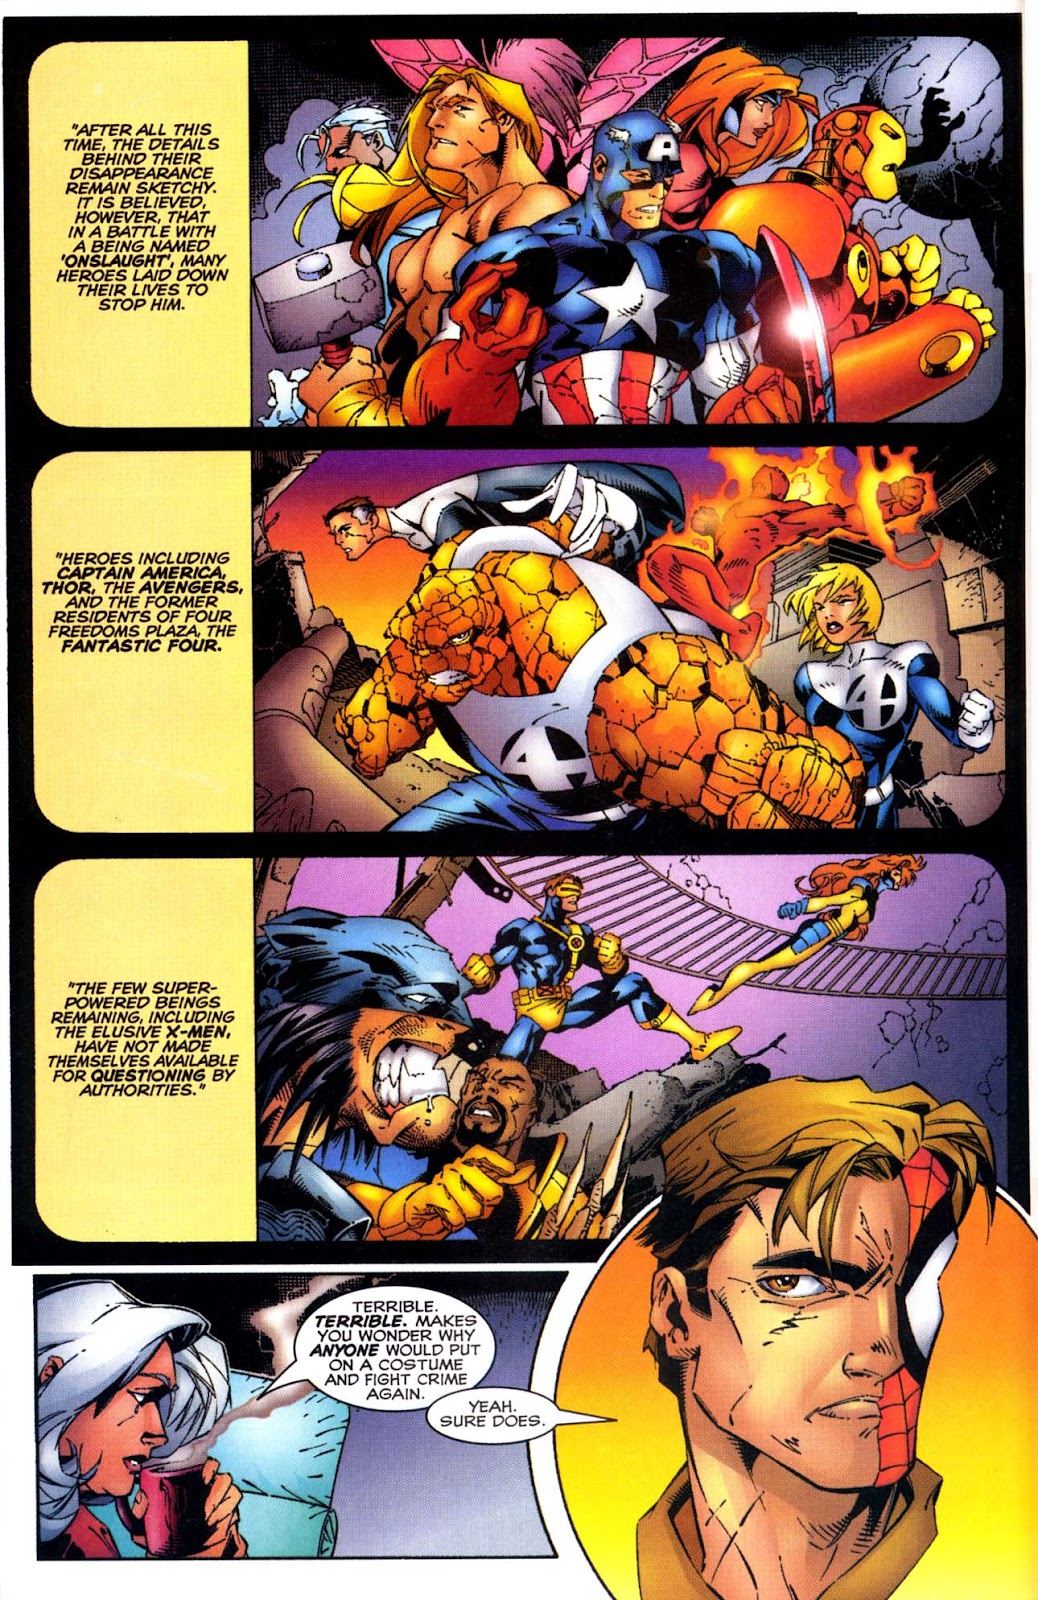 Heroes Reborn: The Return issue 1 - Page 14